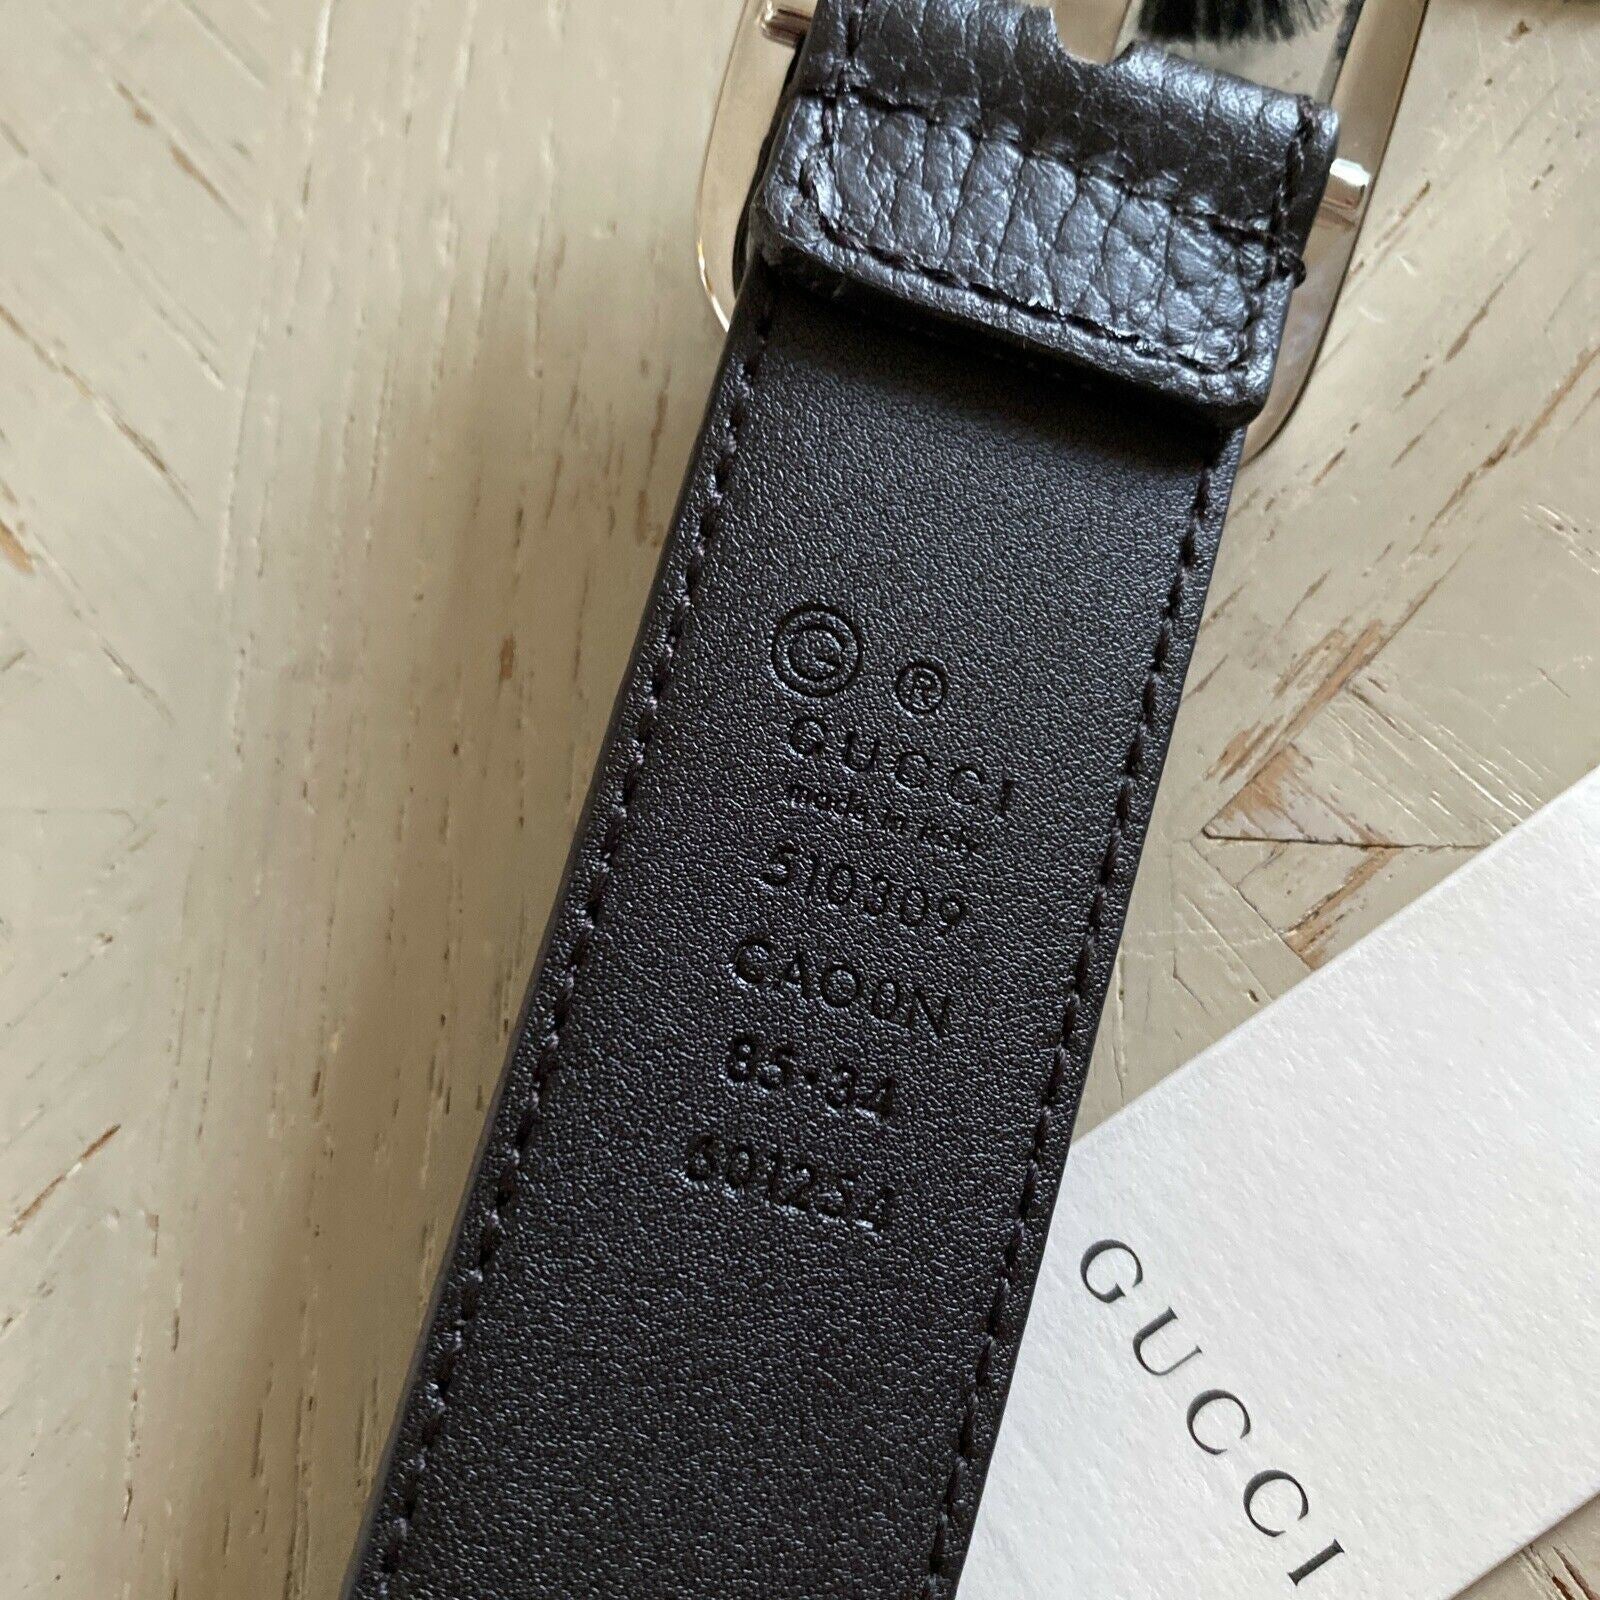 New Gucci Mens Genuine Leather  Belt DK Brown 85/34 Italy